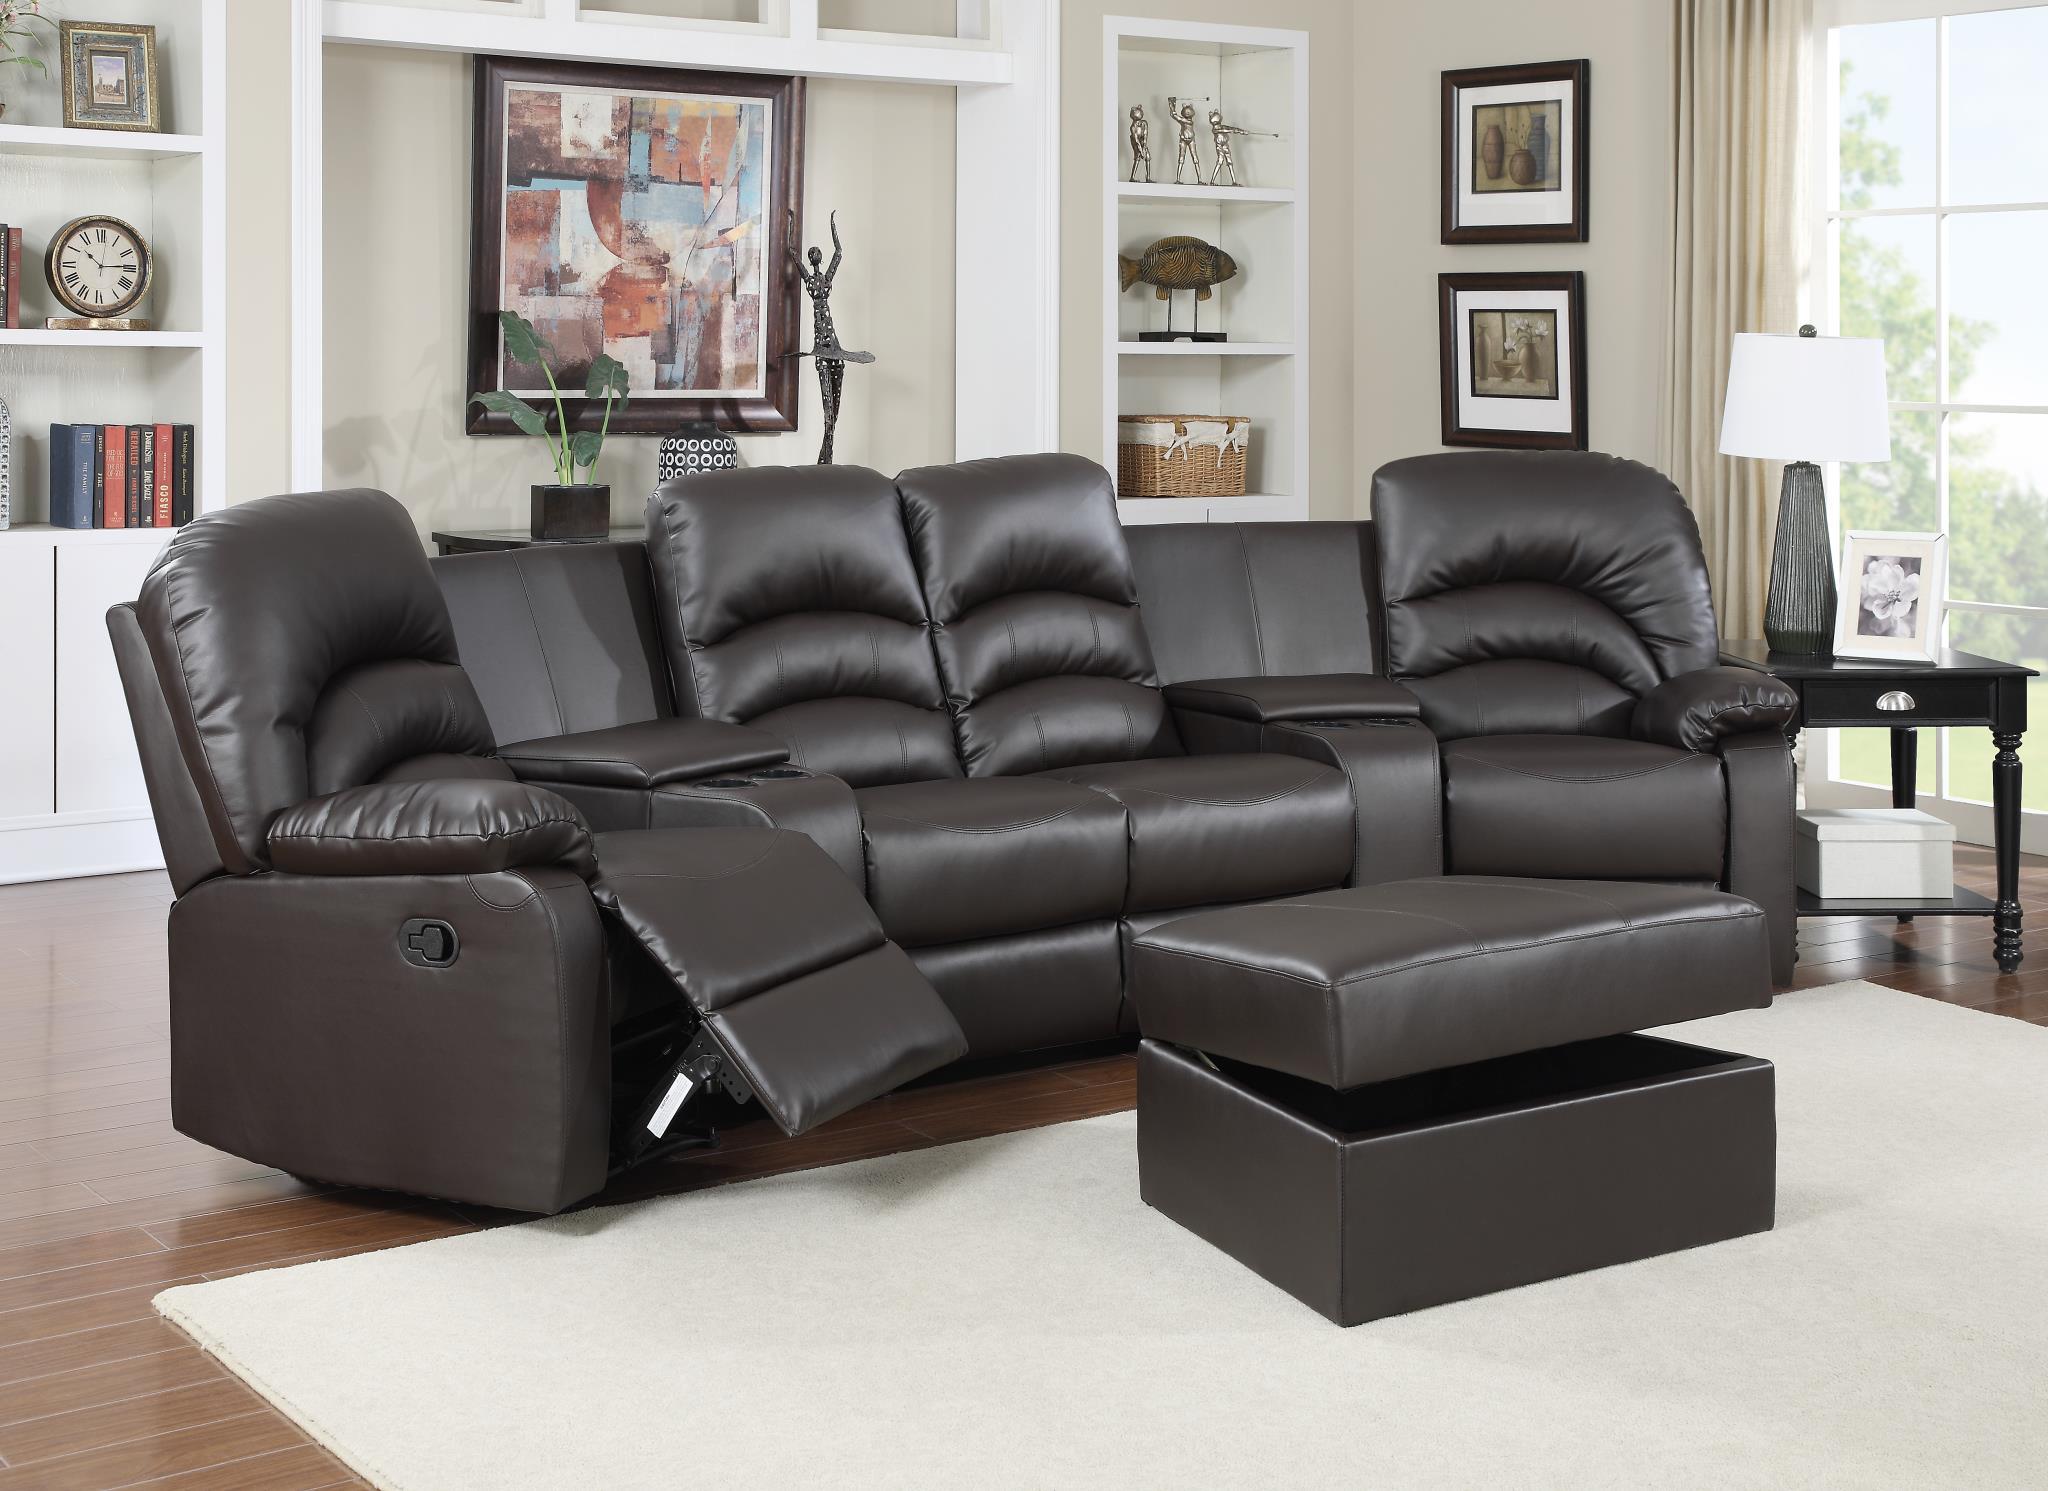 

    
Soflex Lyra Reclining Brown Leather Sectional w/Ottoman Home Theater Seats
